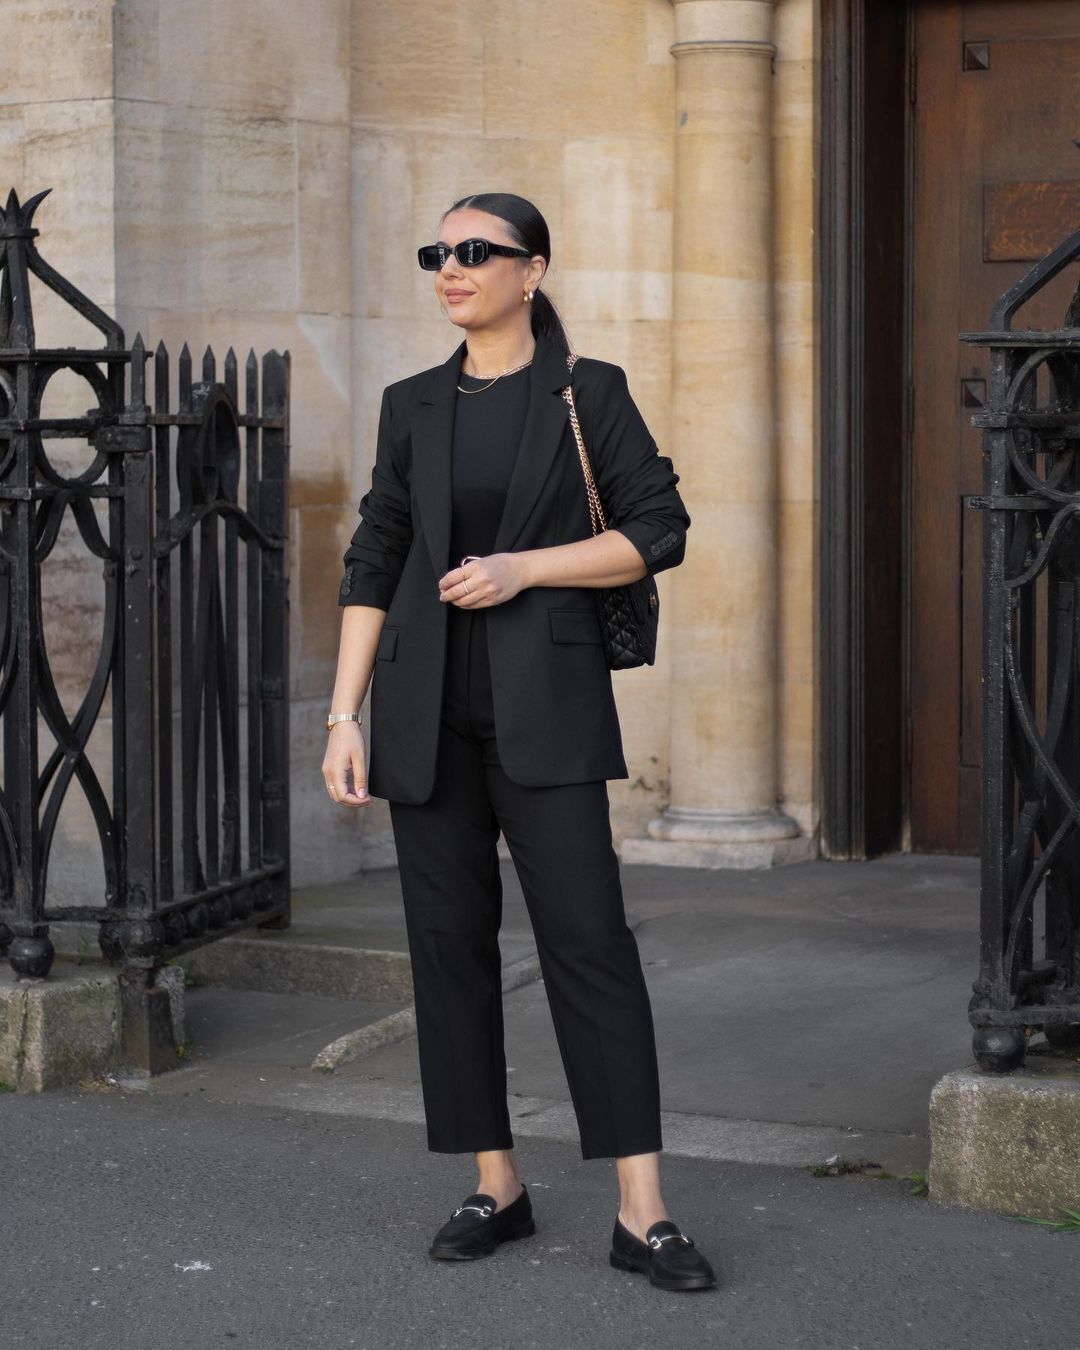 Fall 2023 must-haves: 5 stylish ideas what to wear a blazer with to look spectacular